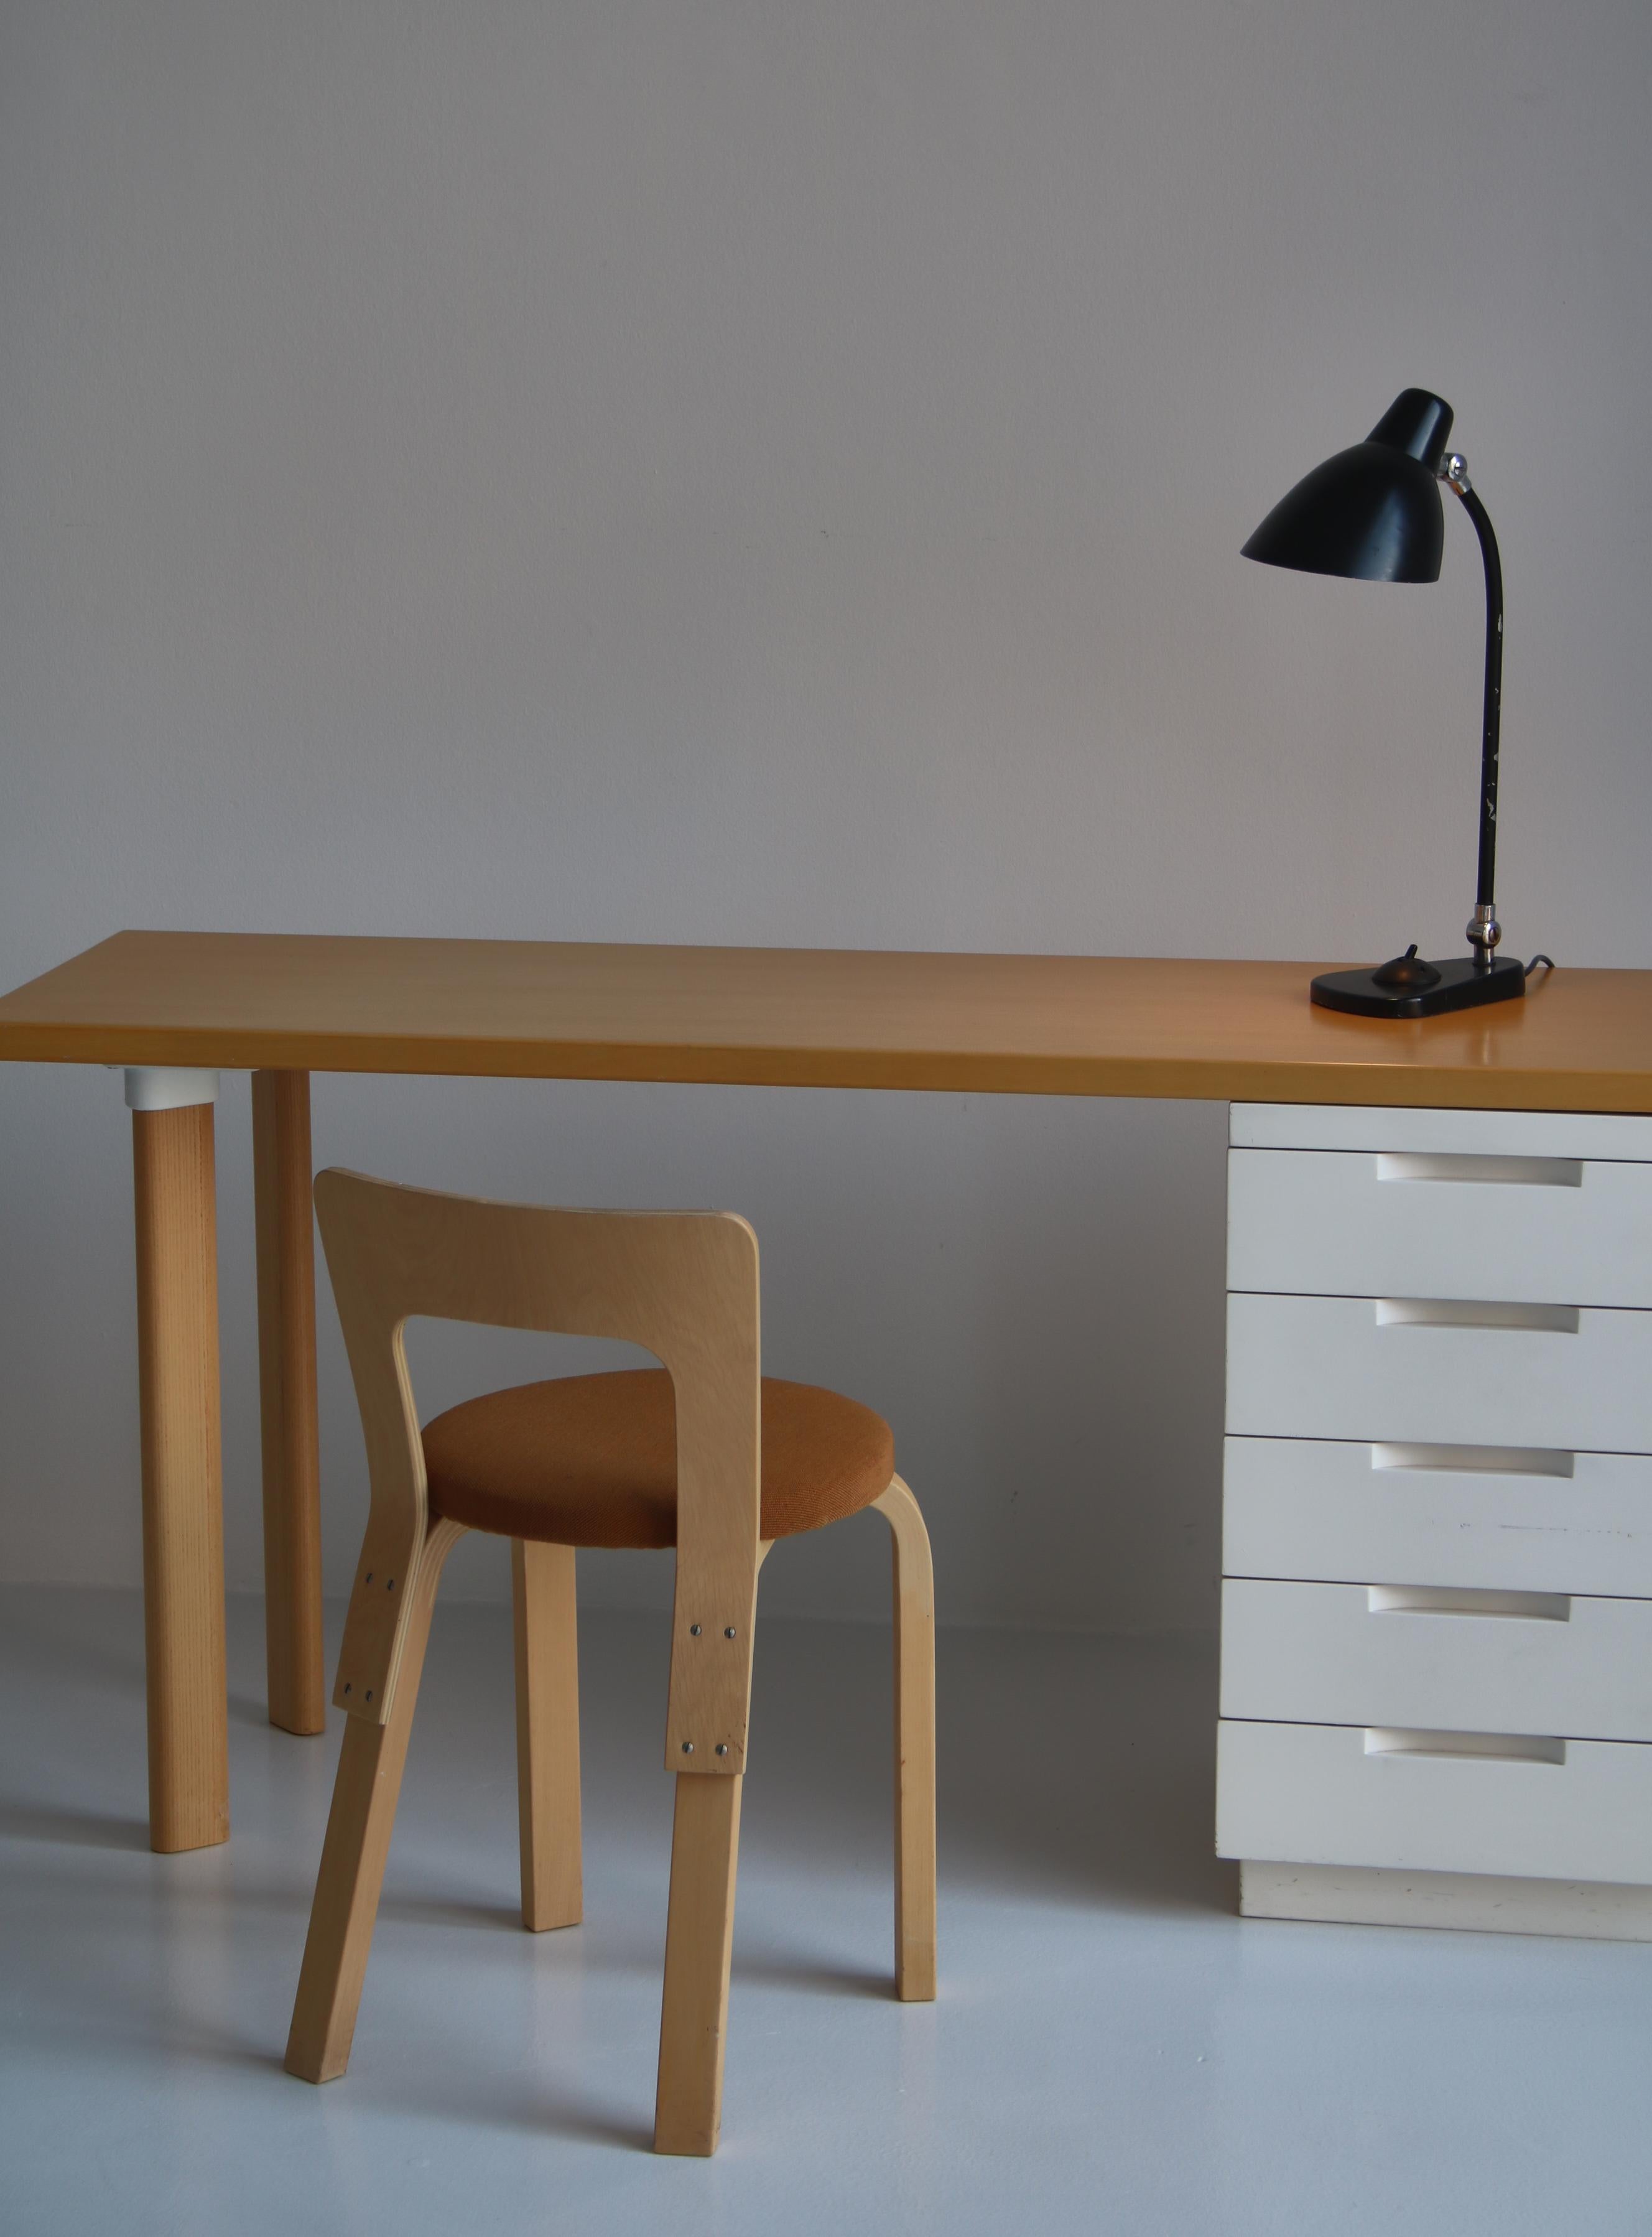 Alvar Aalto work table and chair model 65 in wonderful vintage condition made at Artek in the 1960s. Table is made of laminated elm and the chair is made of birch. Original wool upholstery on the chair. The cabinet still has the original white